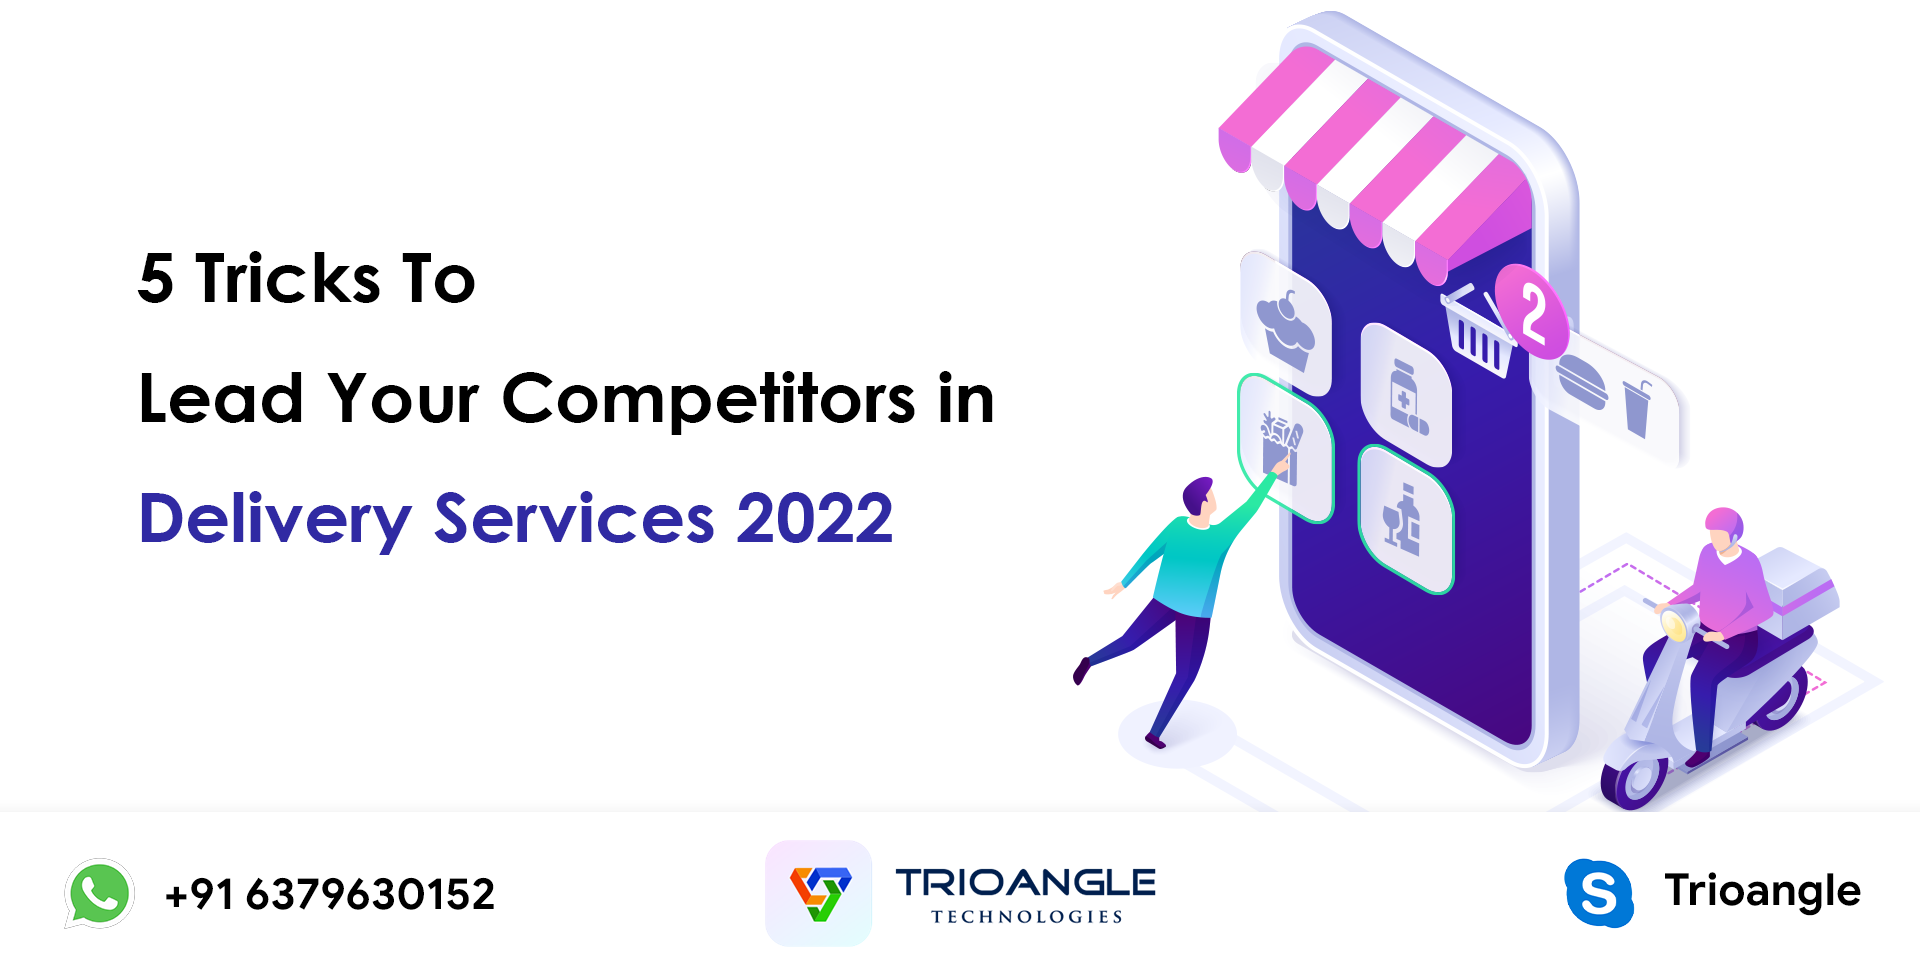 5 Tricks To Lead Your Competitors in Delivery Services 2022